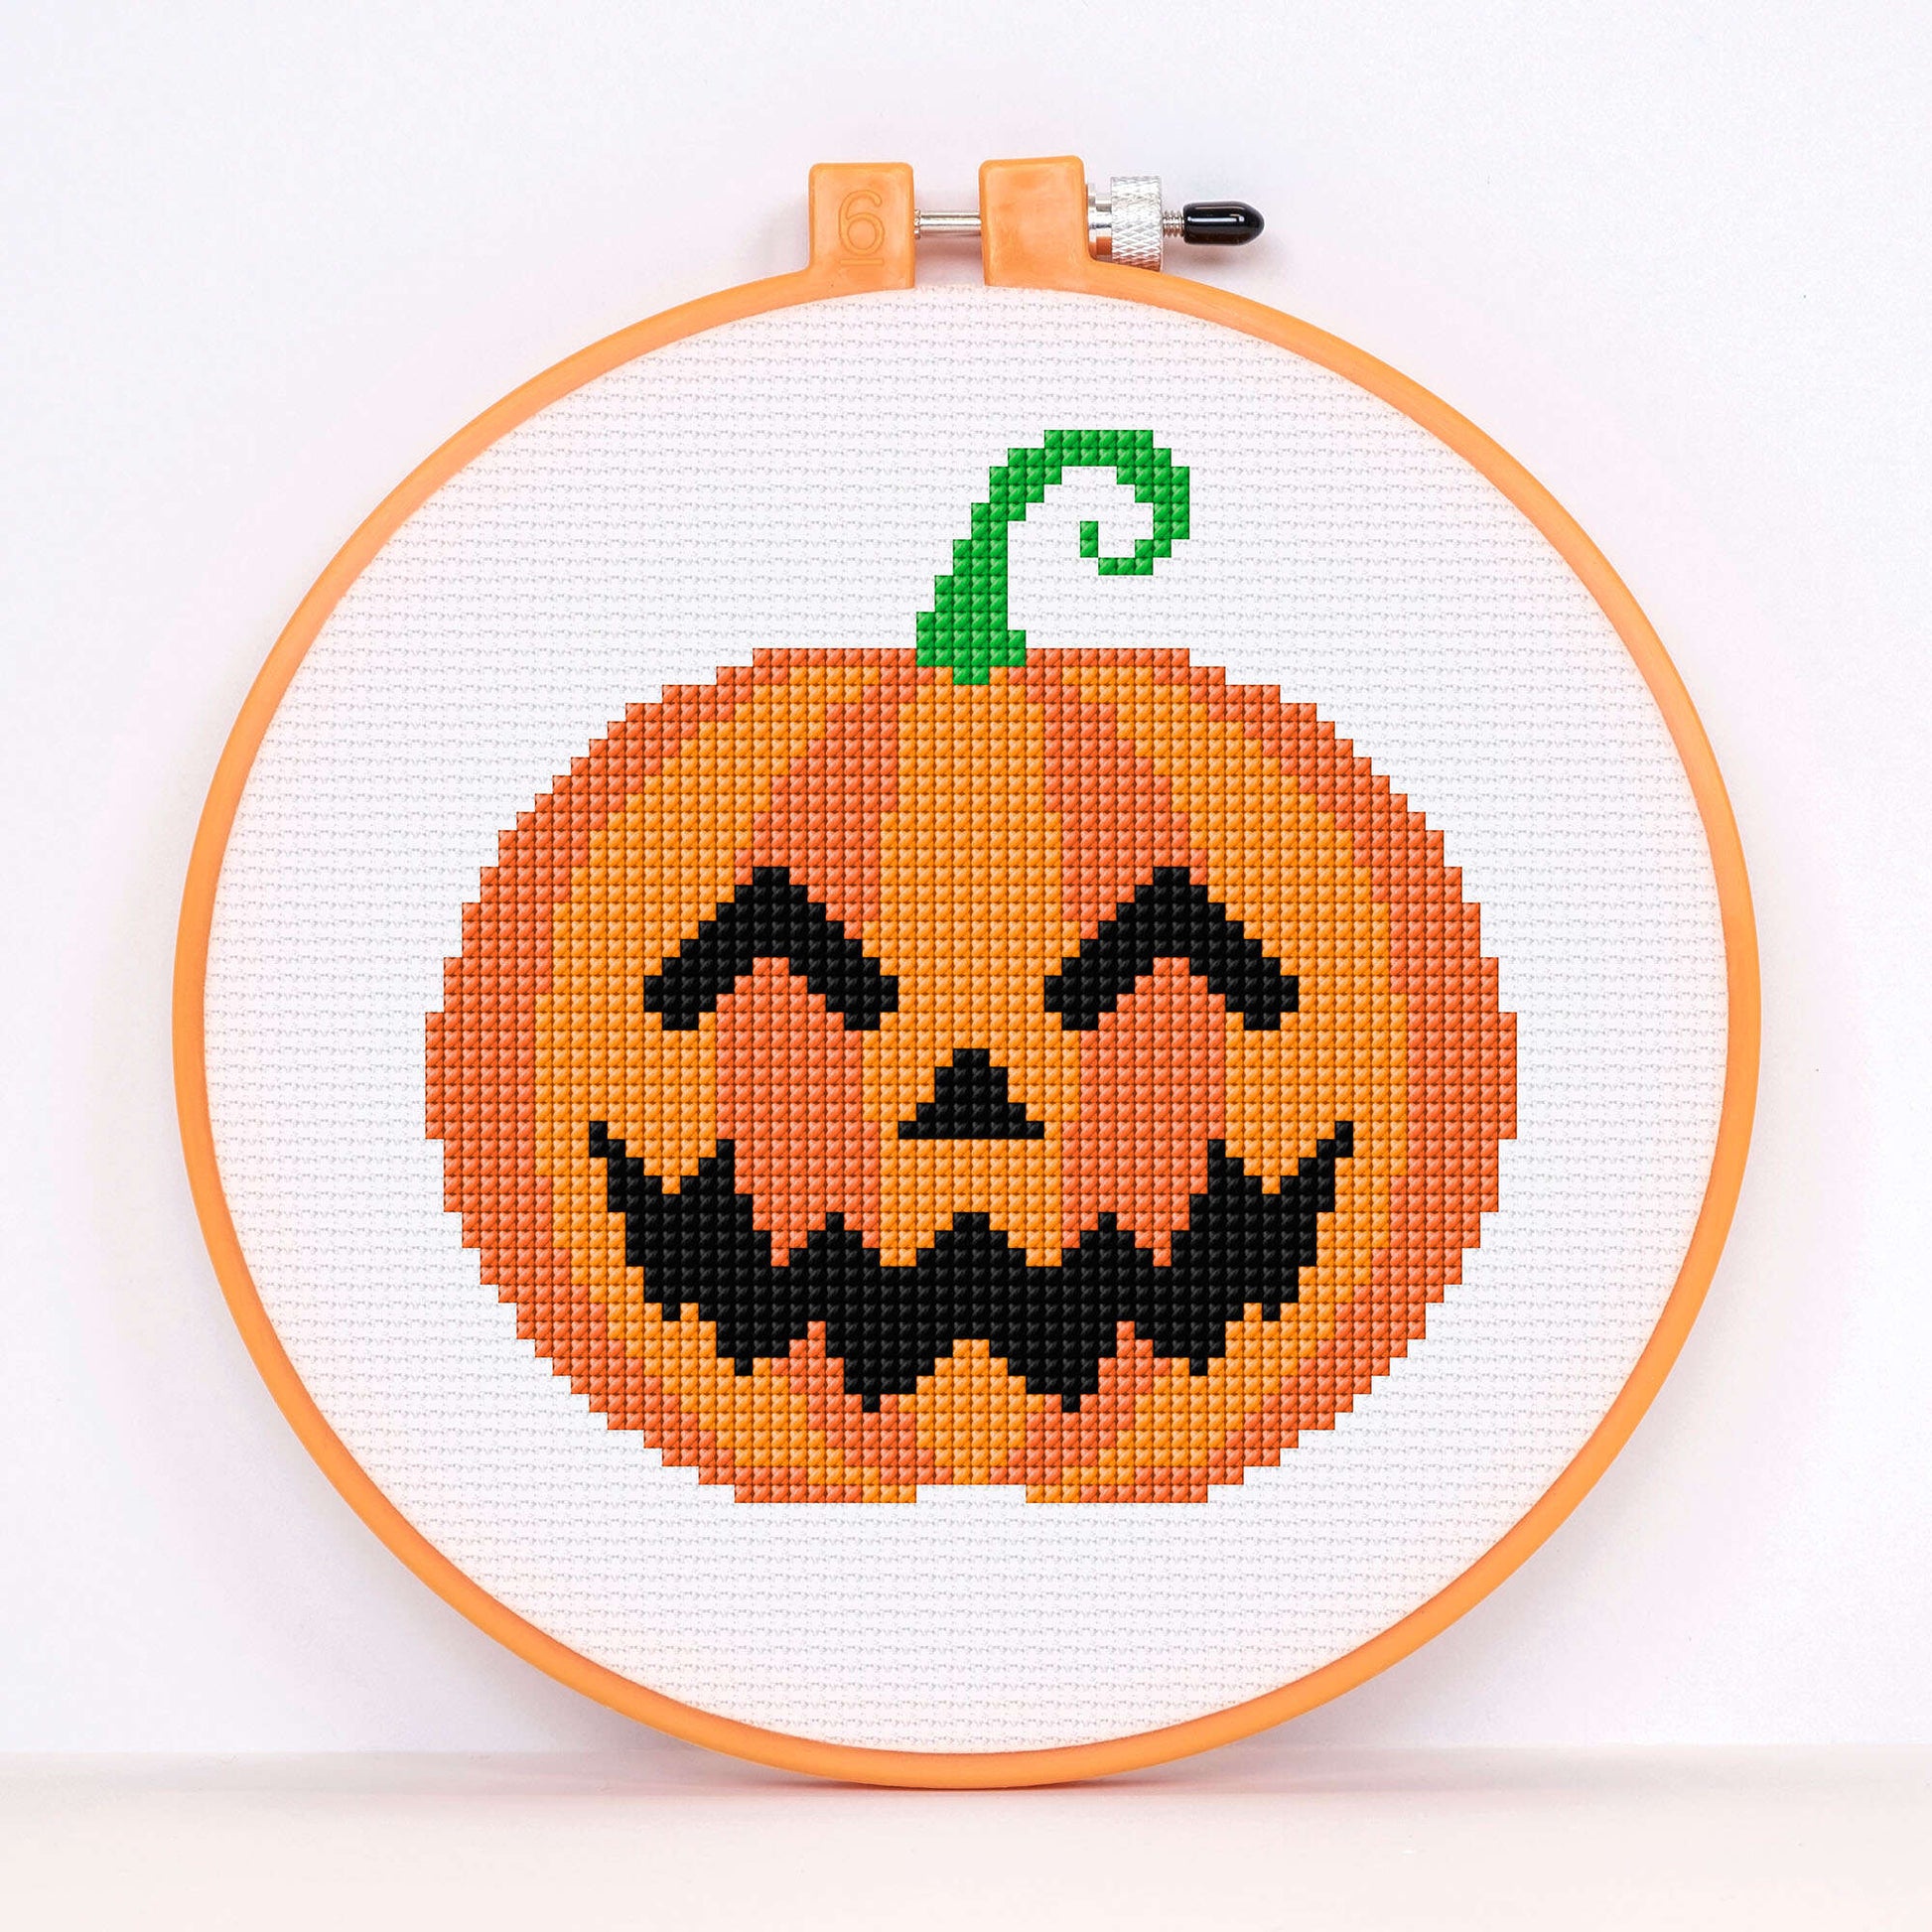 Embroidery Kit for Beginners Cross Stitch Kits Trick or Treat with